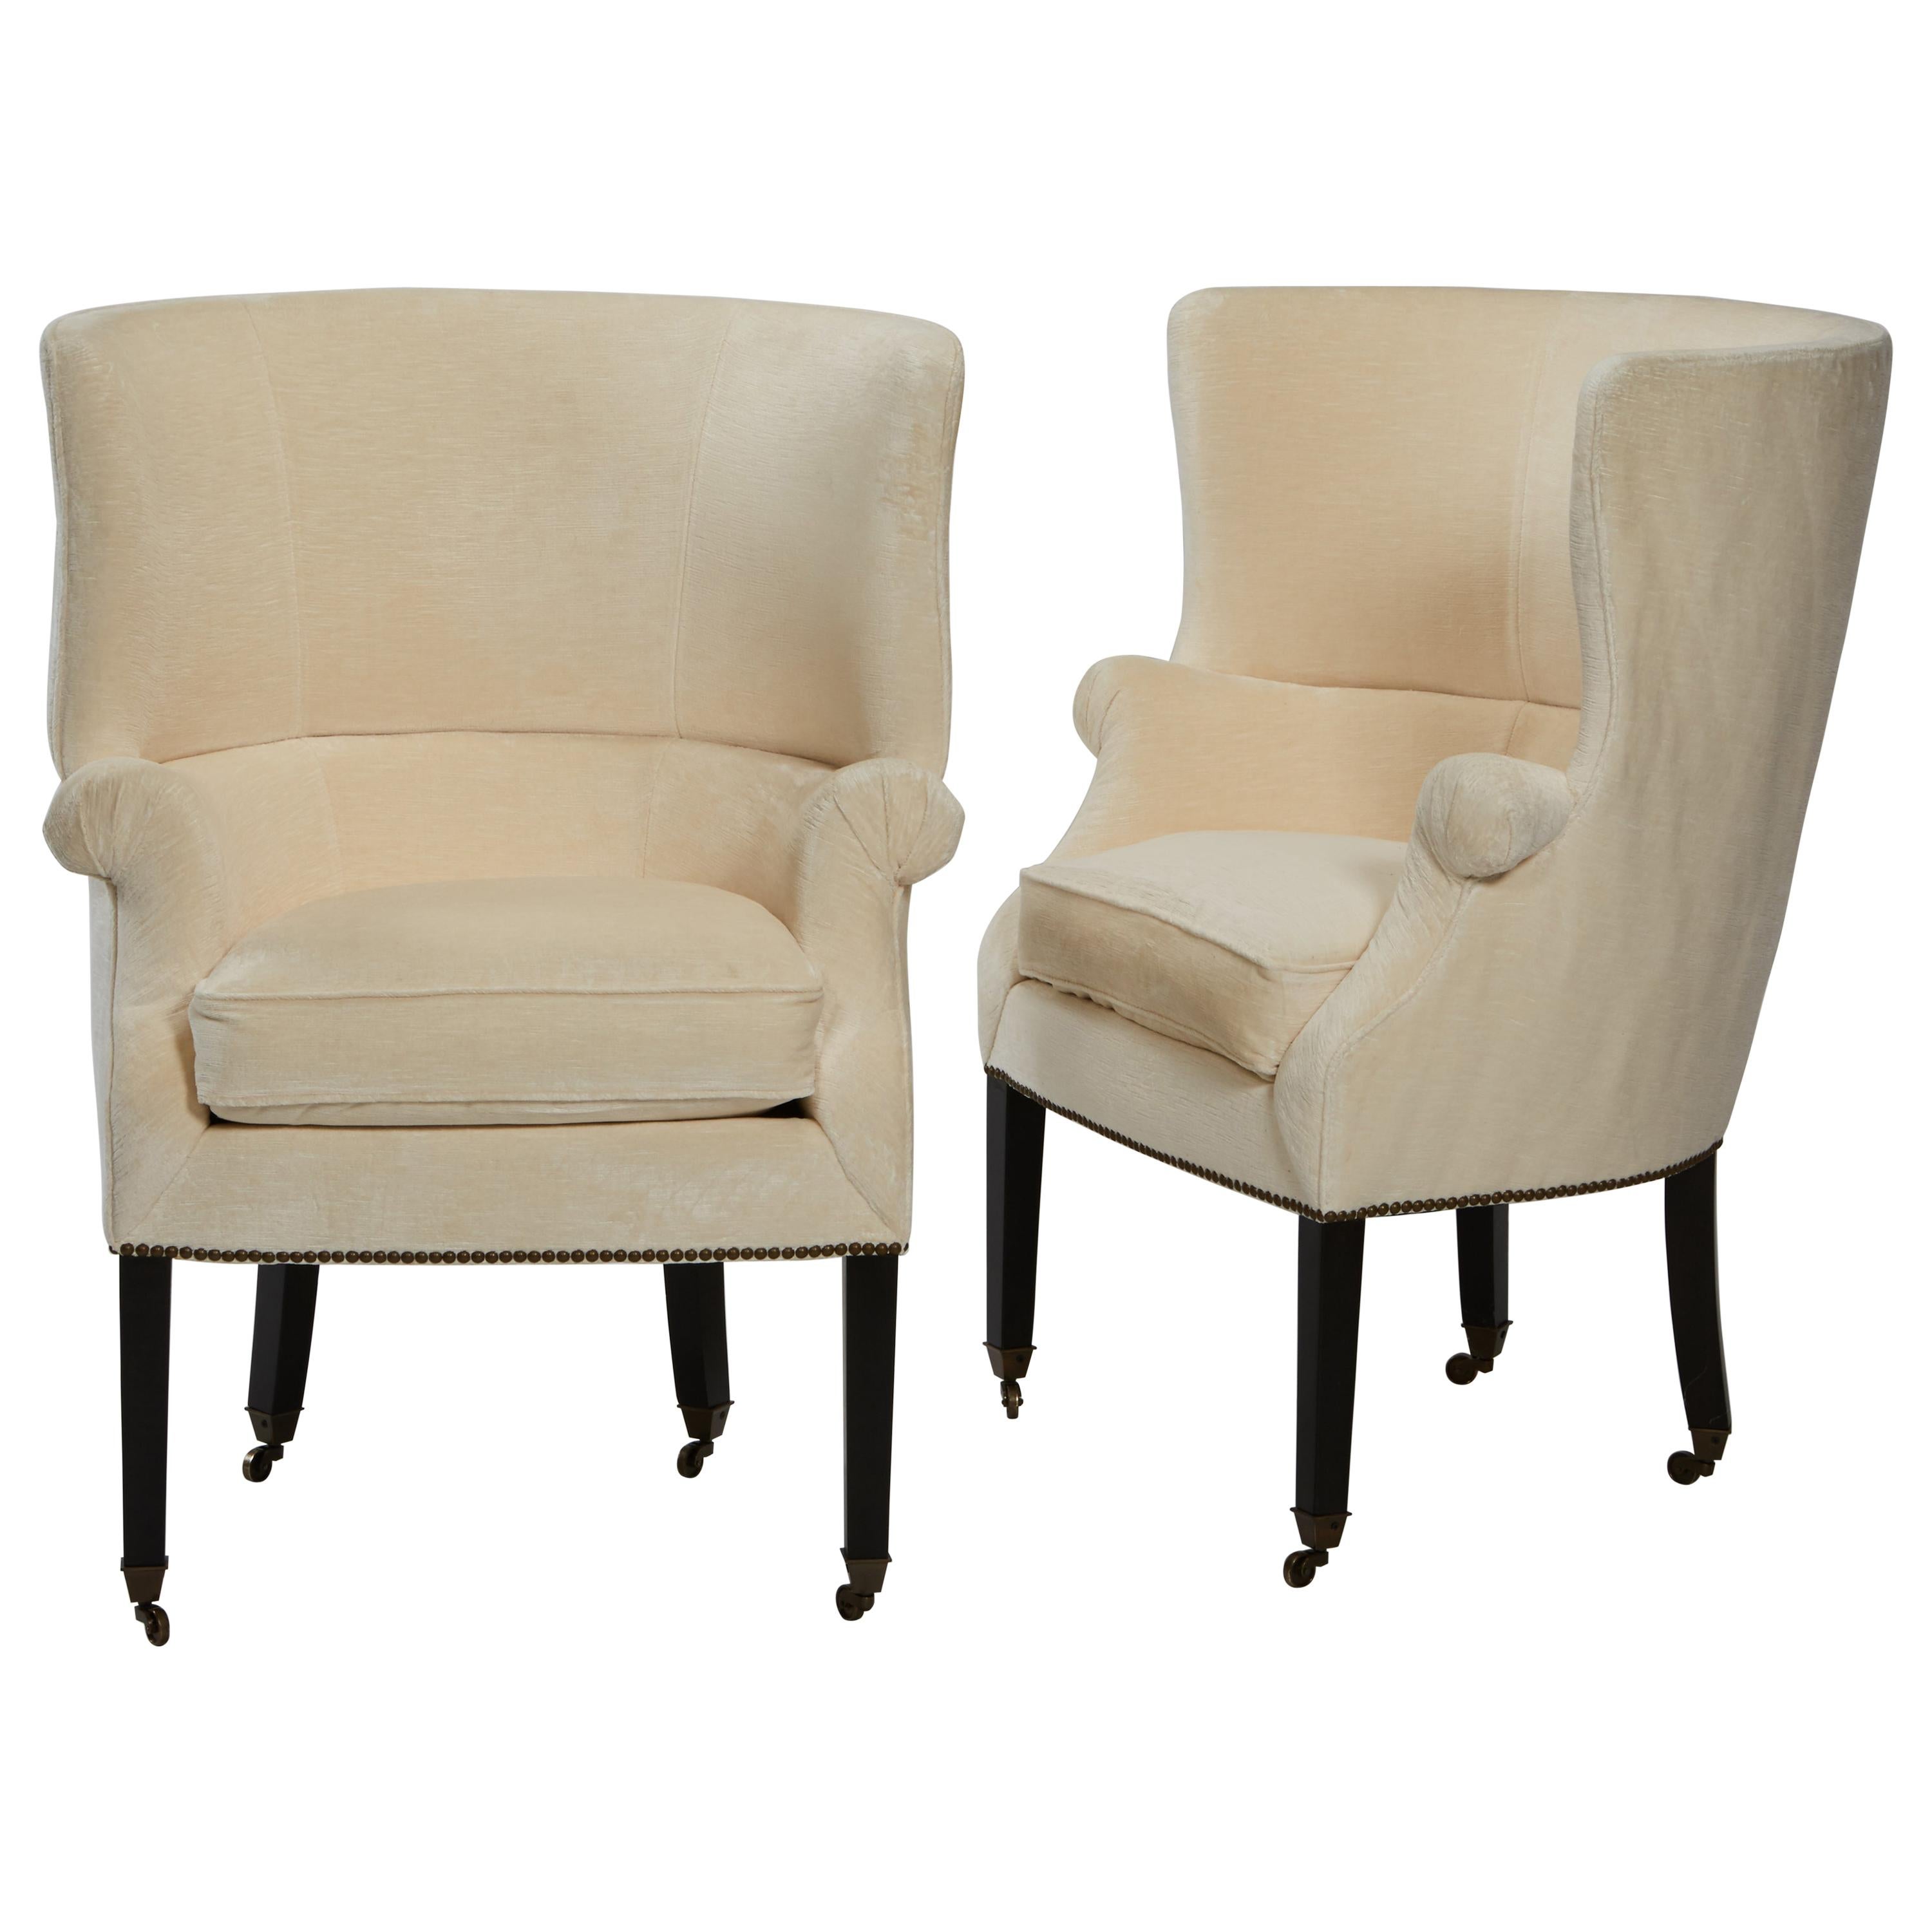 Pair of Victoria Hagan "Emma" Small Wingback Chairs in Hunt Off-White Velvet For Sale